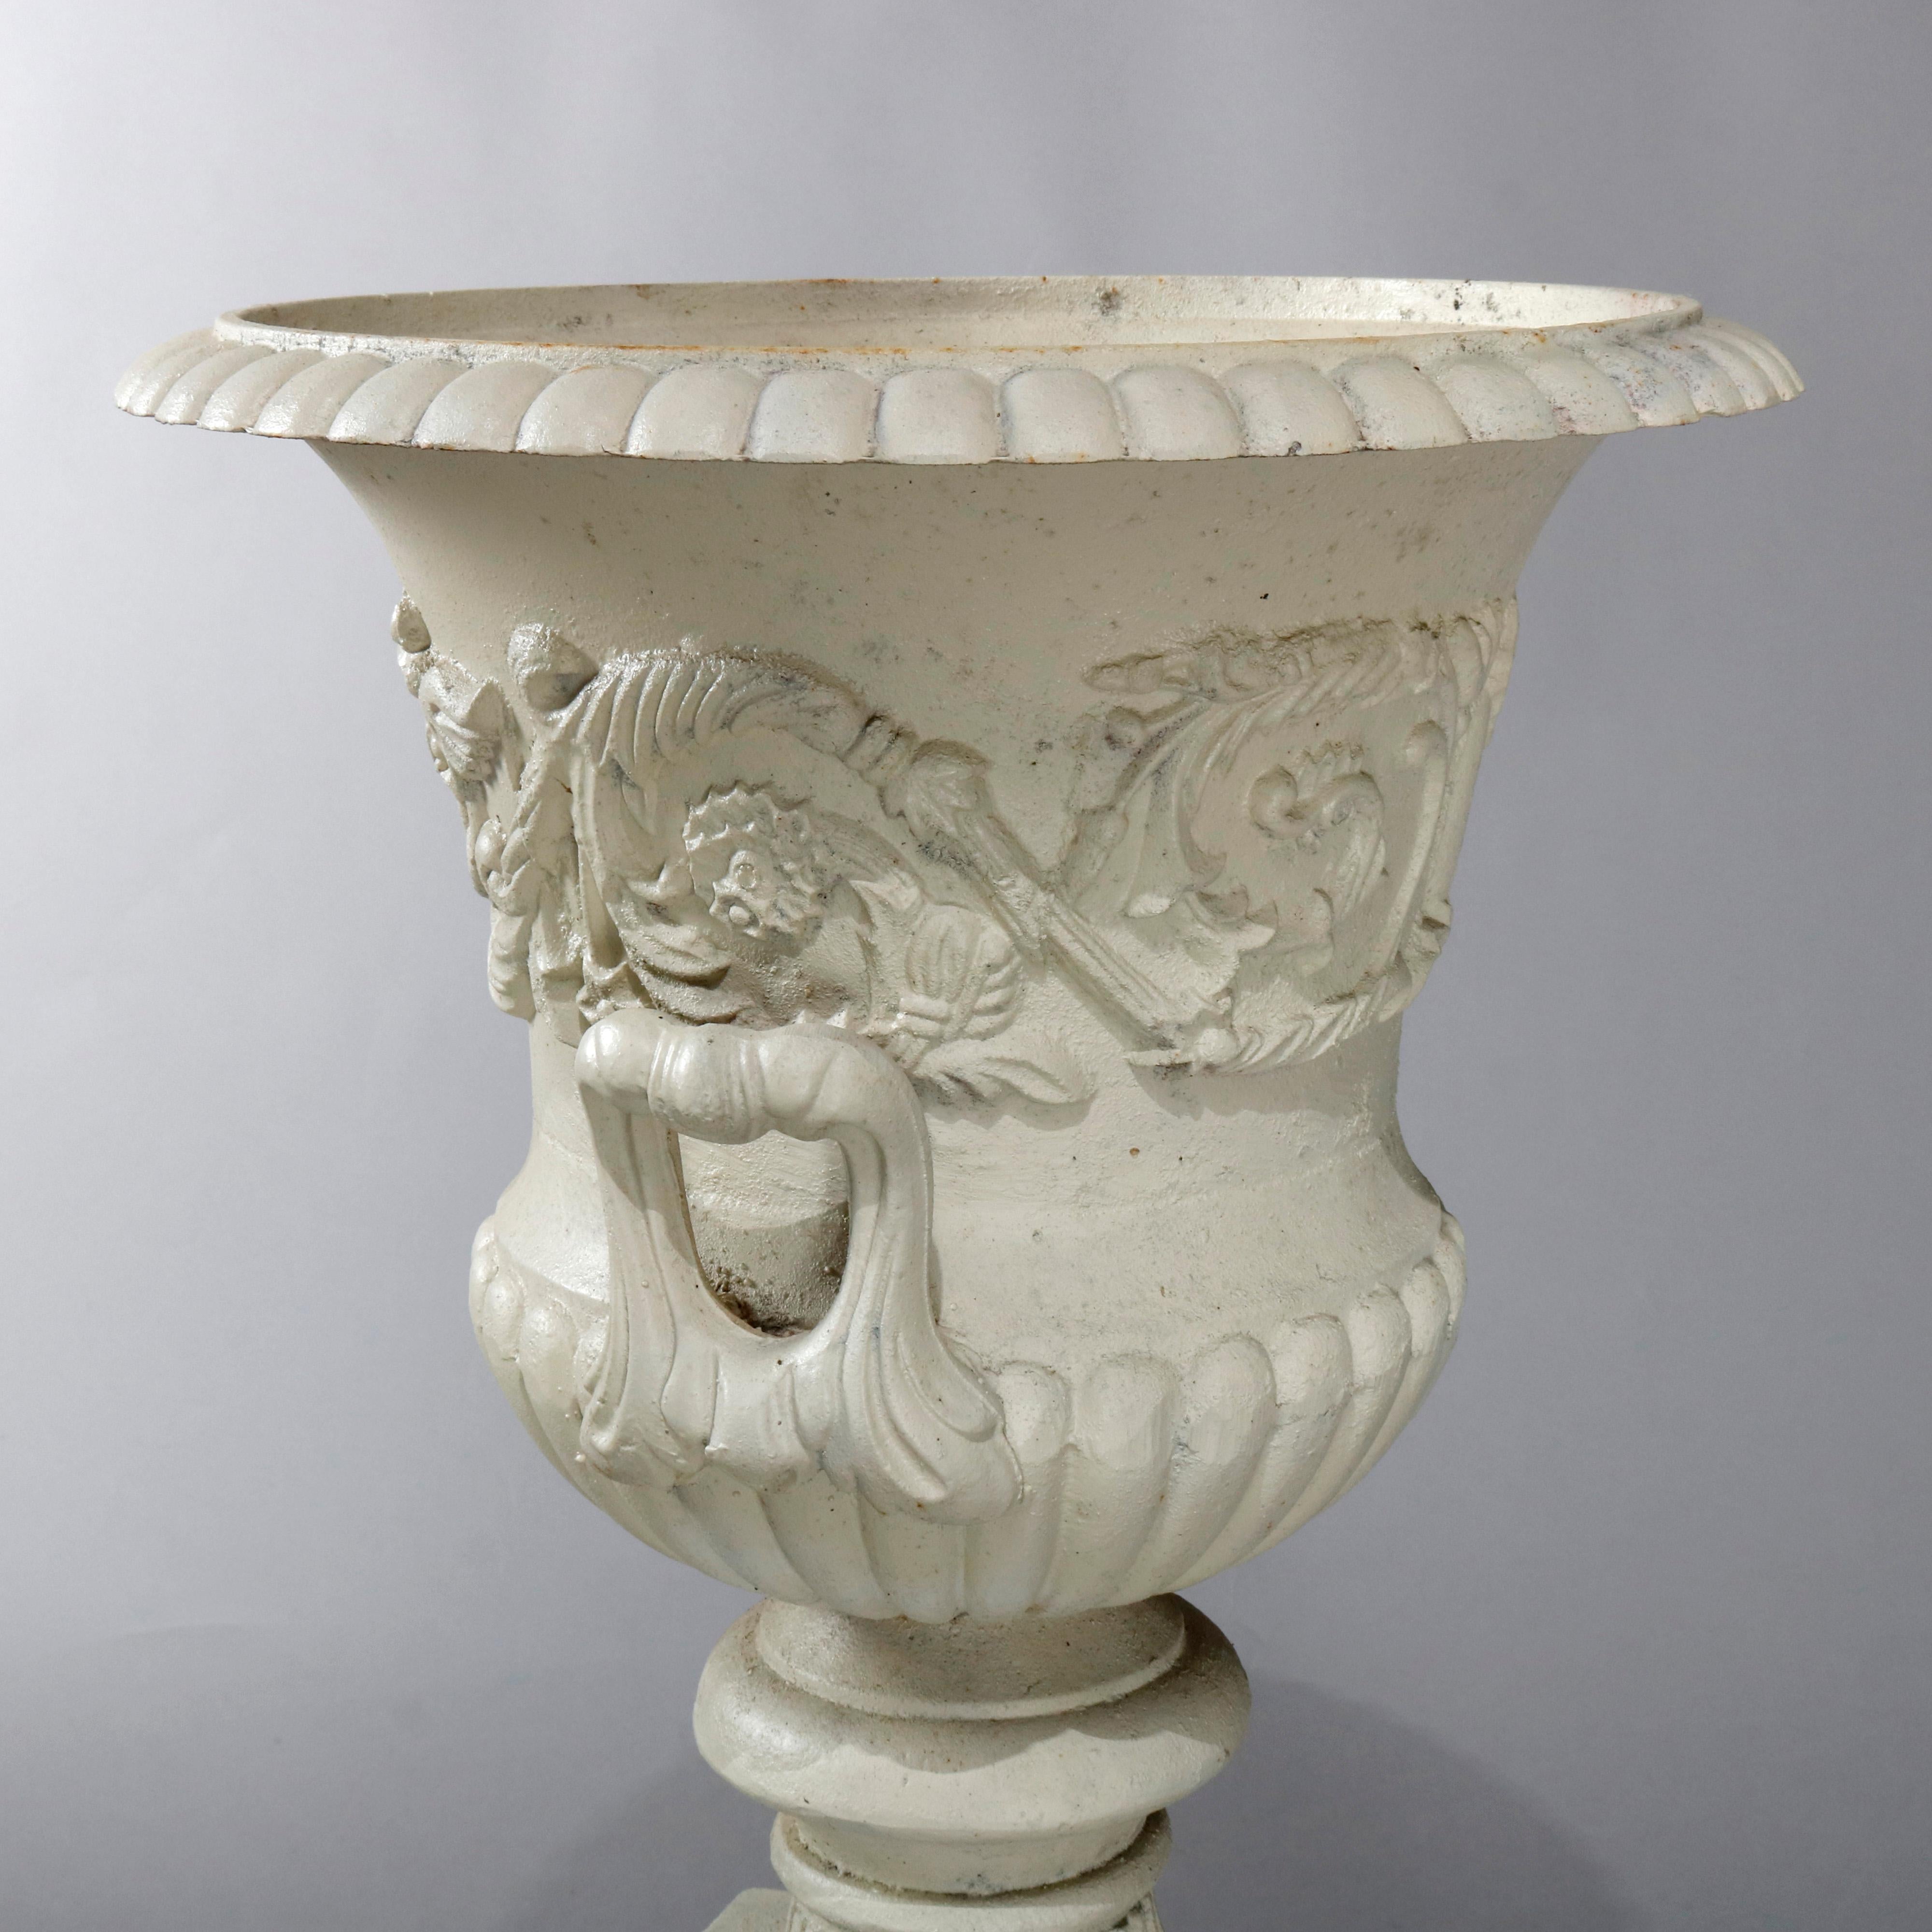 An antique French neoclassical garden urn offers central foliate and scroll relief band and double handles, seated on square and stepped base, separates into two parts, 20th century

Measures: 36